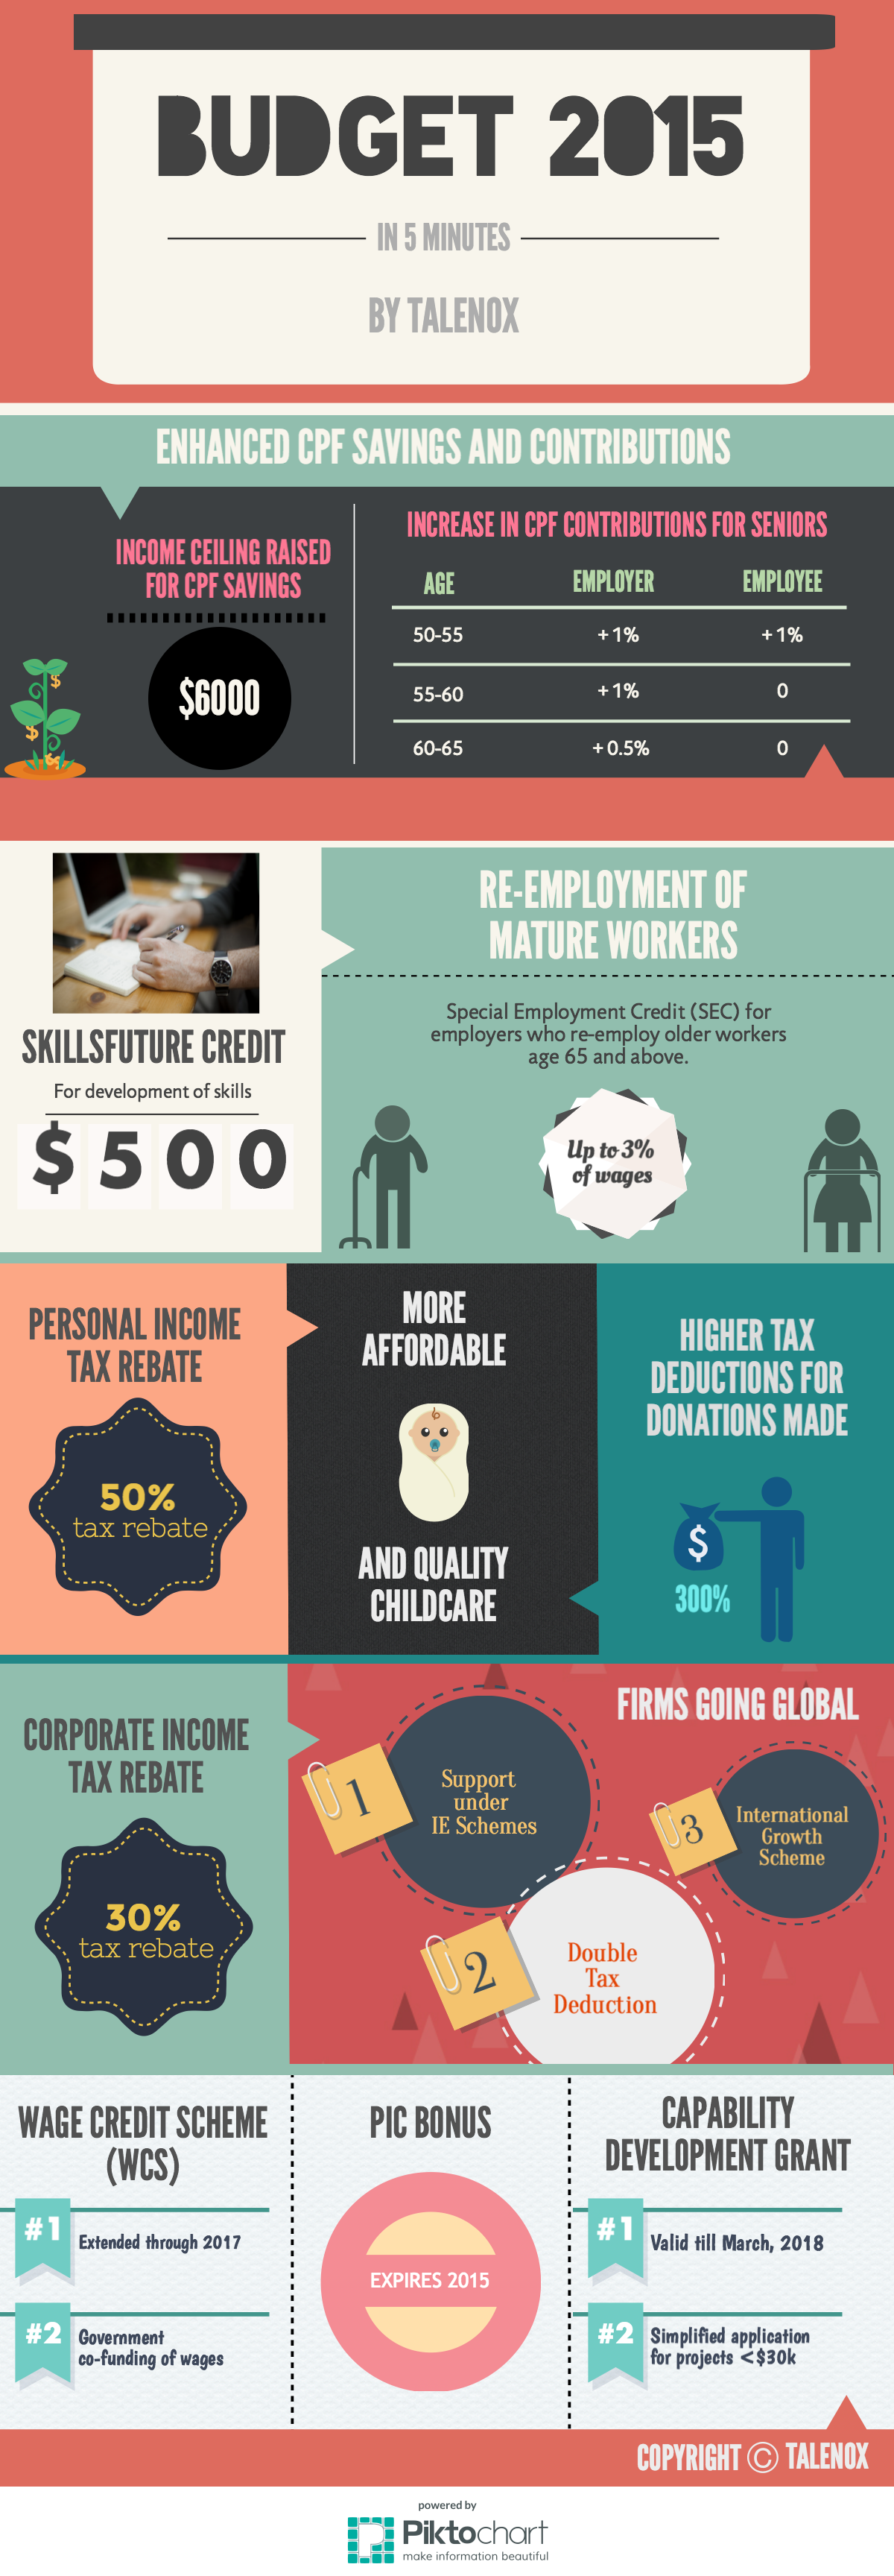 Singapore Budget 2015 in 5 Minutes (Infographic) | The Vox of Talenox